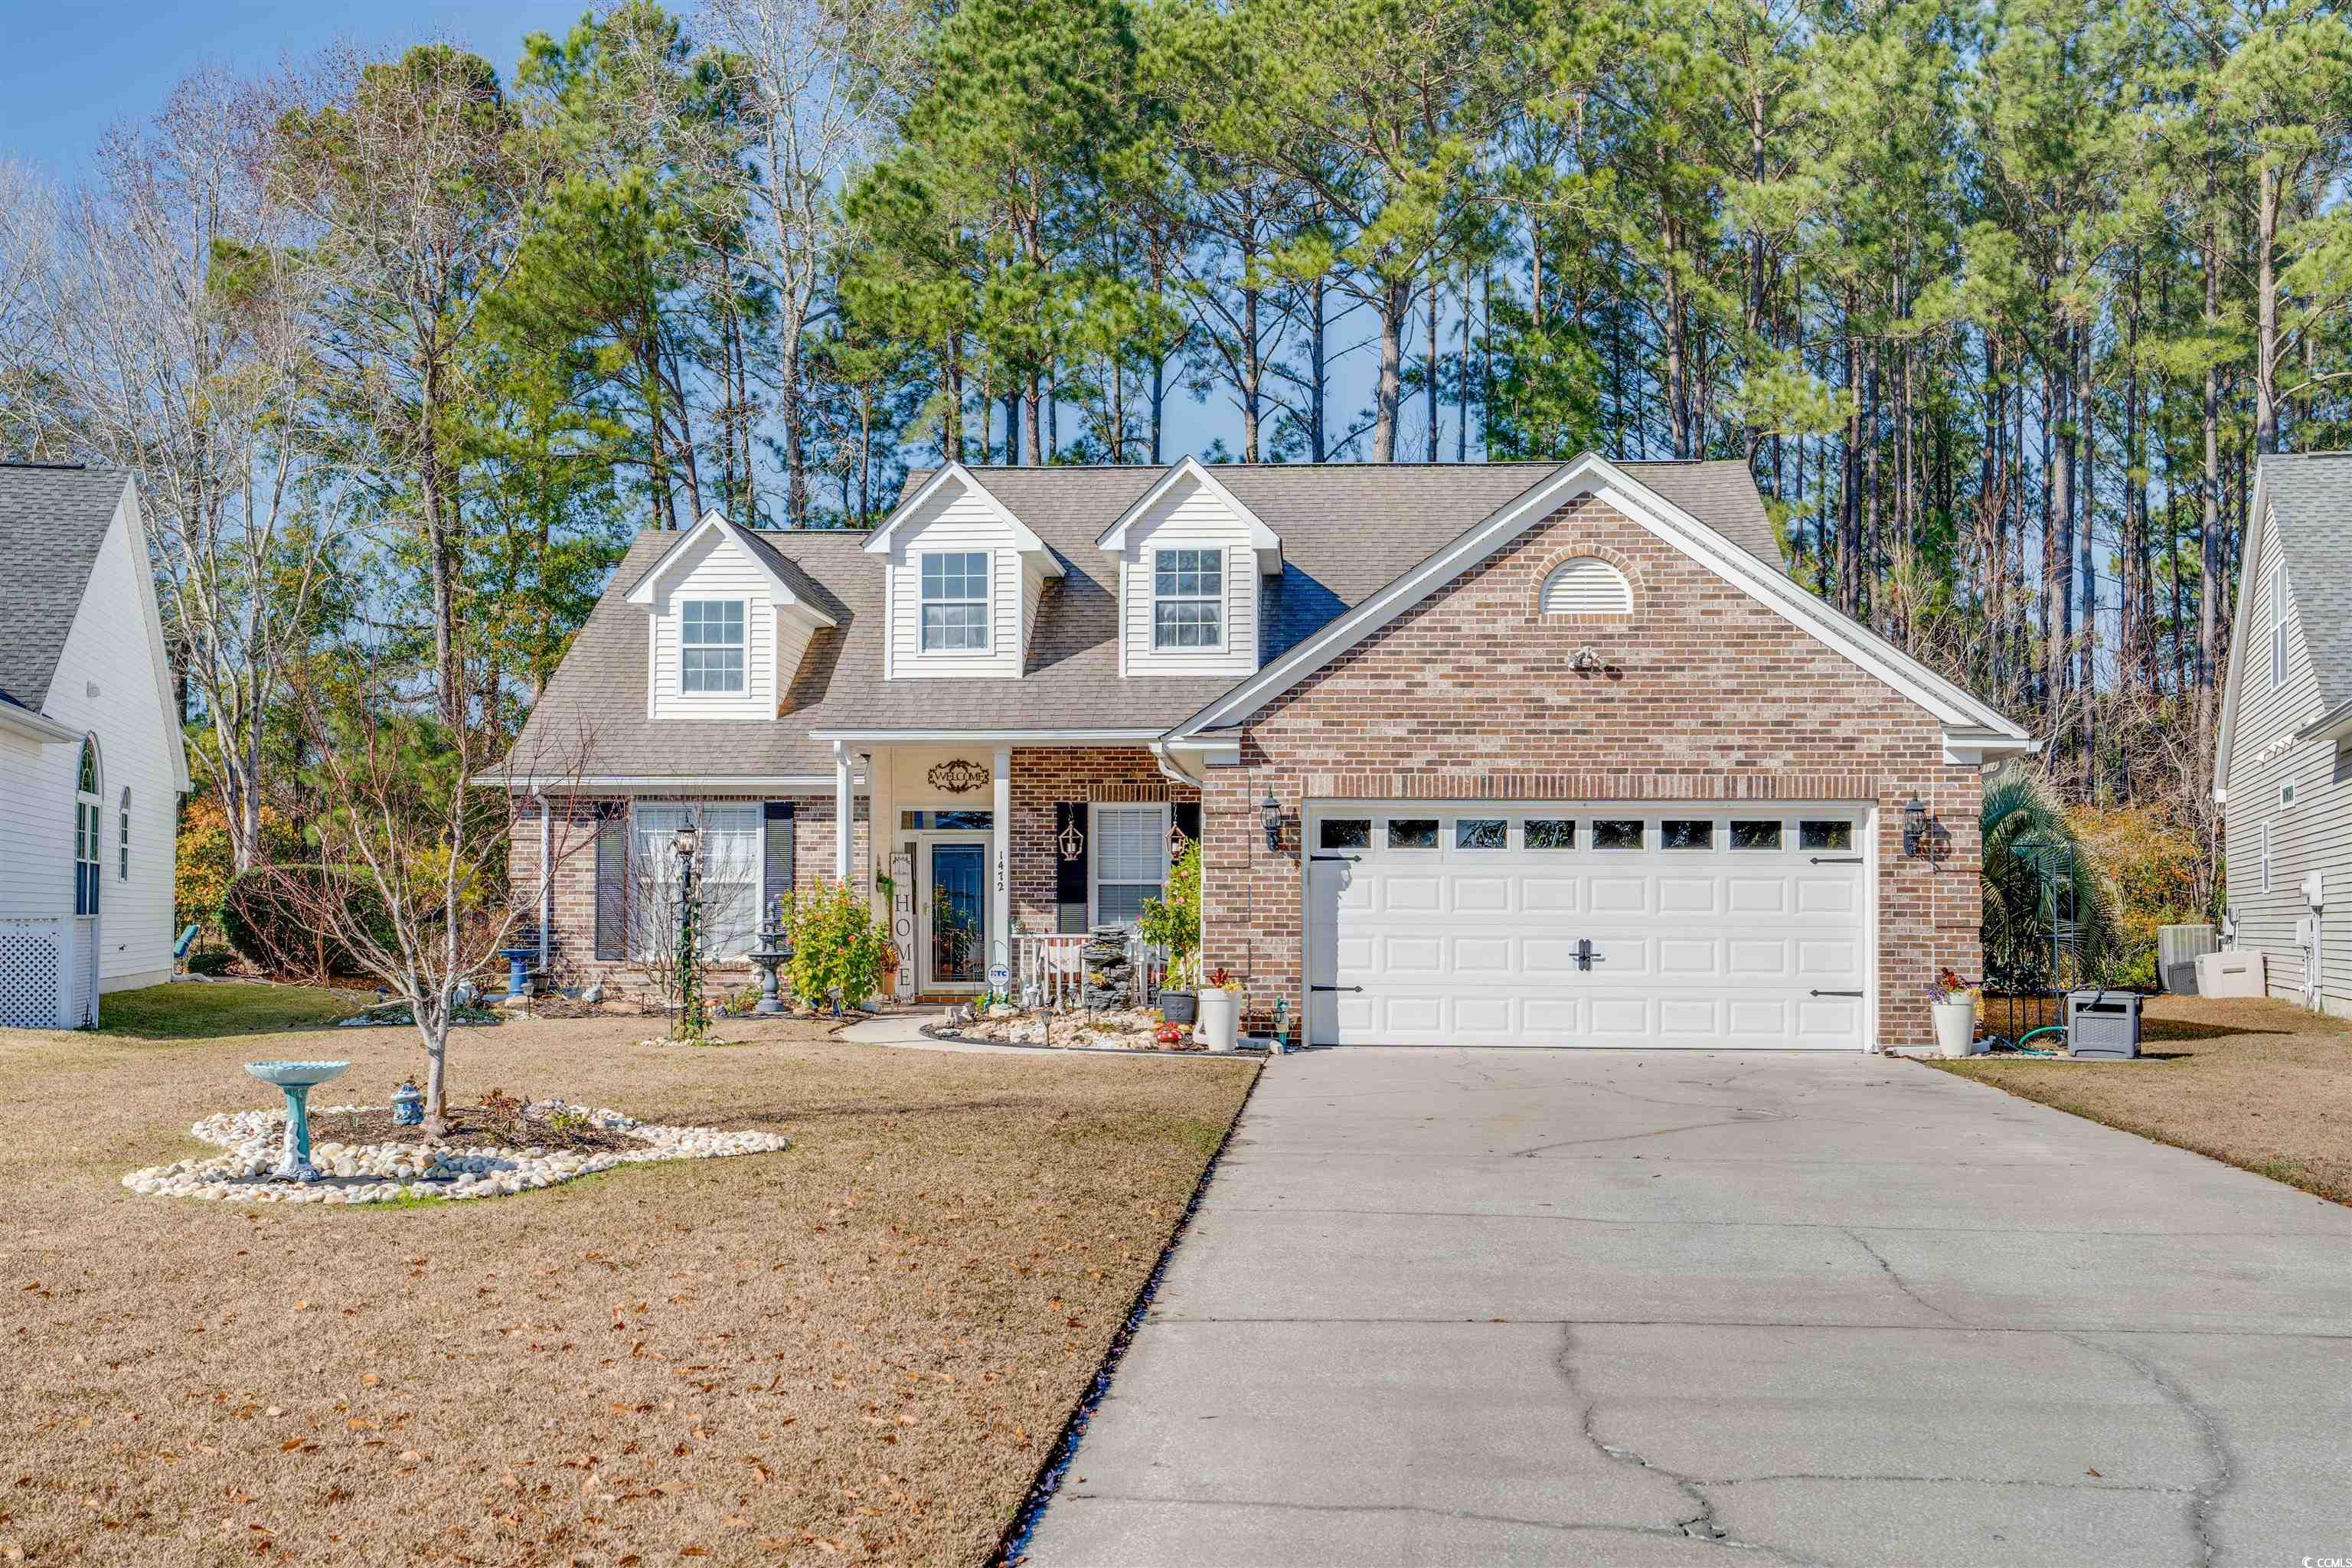 1472 Winged Foot Ct. Murrells Inlet, SC 29576